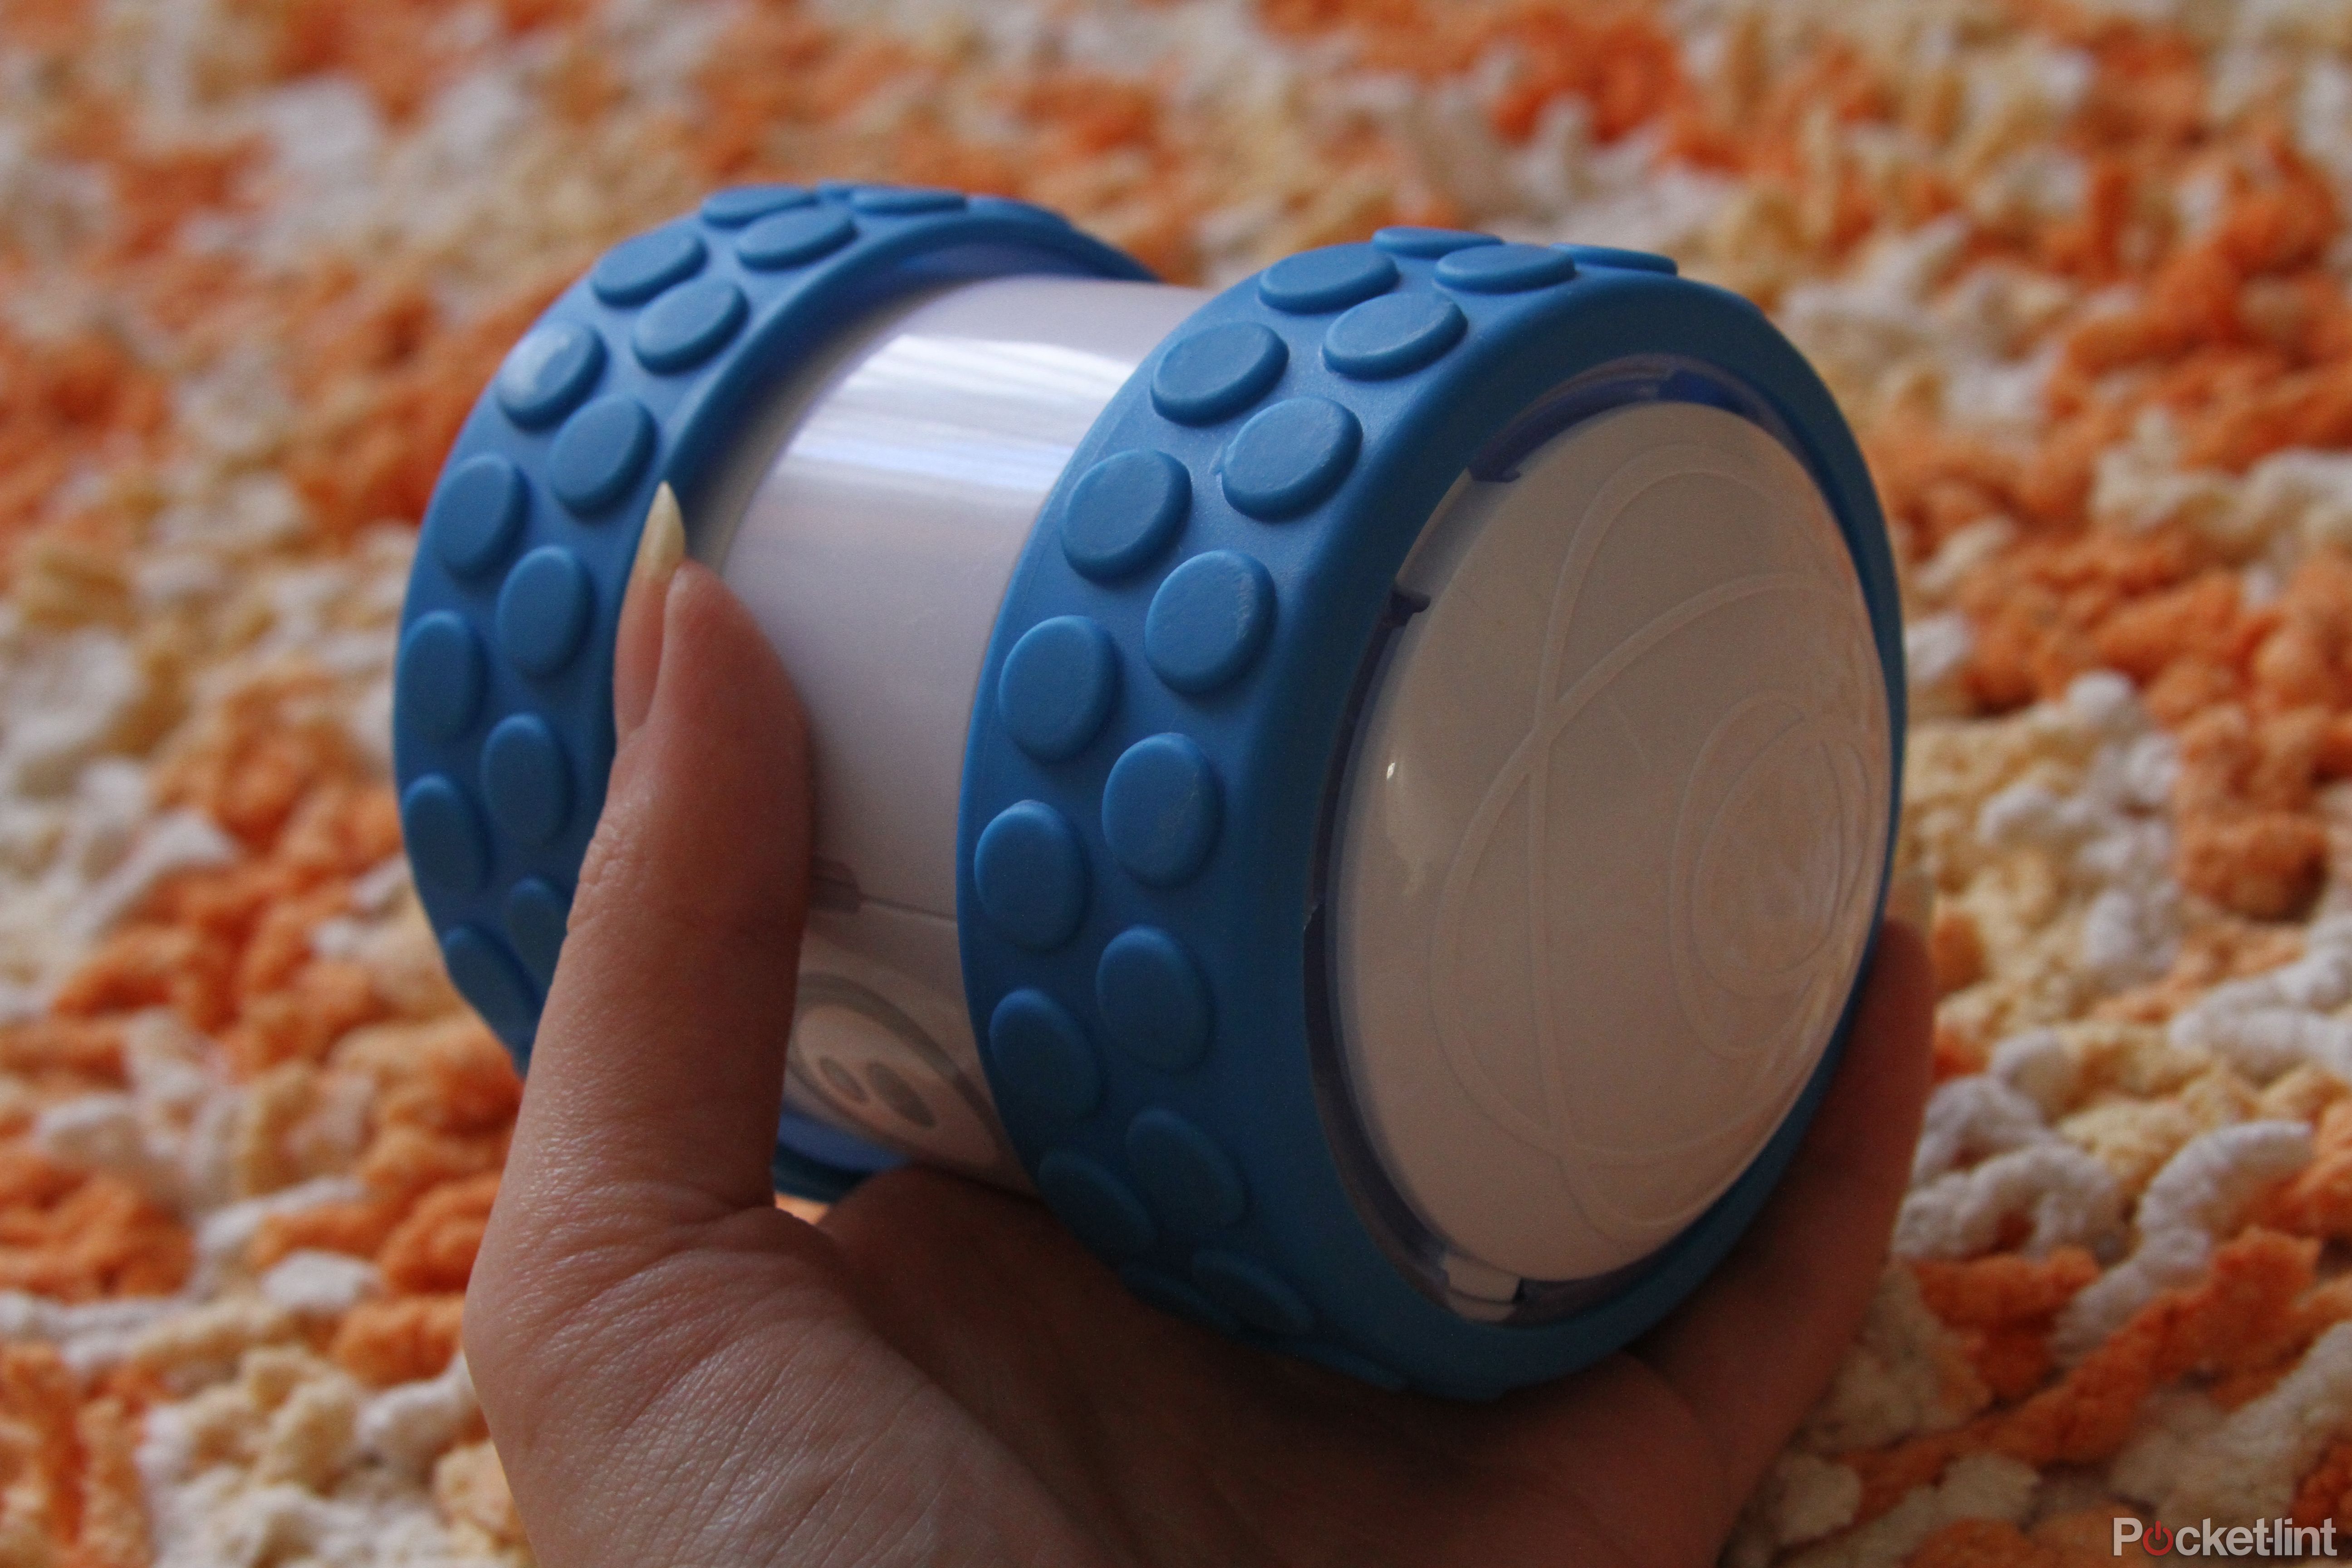 Sphero on X: Build your #Ollie your way with custom shells, tires